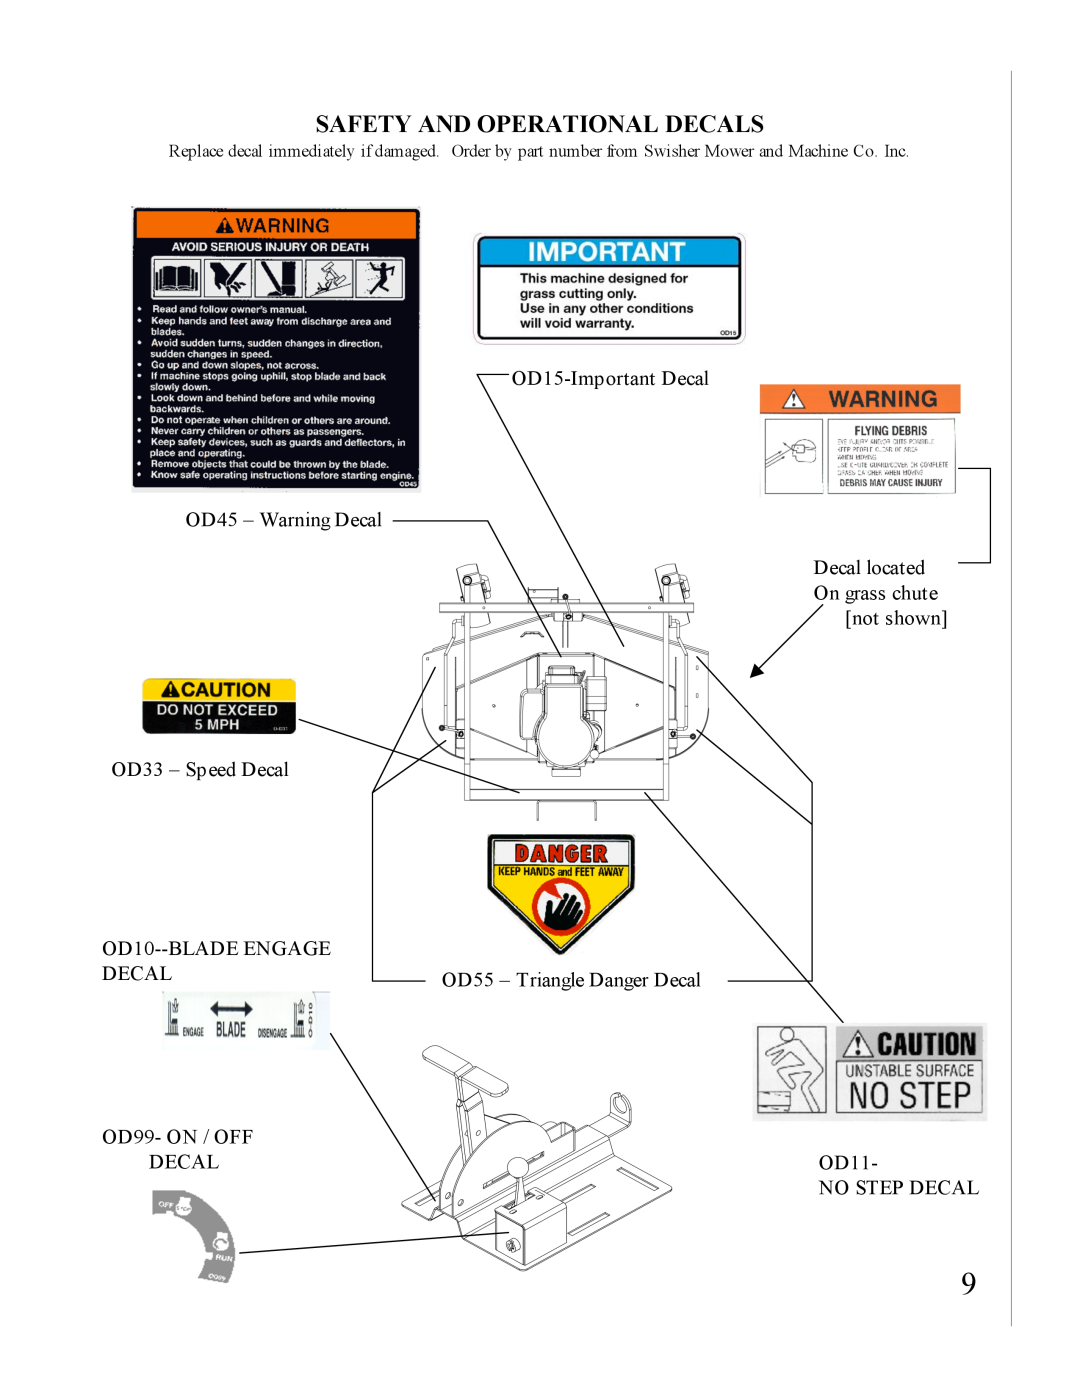 Swisher ONFT1150 manual Safety And Operational Decals, OD15-Important Decal OD45 - Warning Decal, OD10--BLADE ENGAGE DECAL 